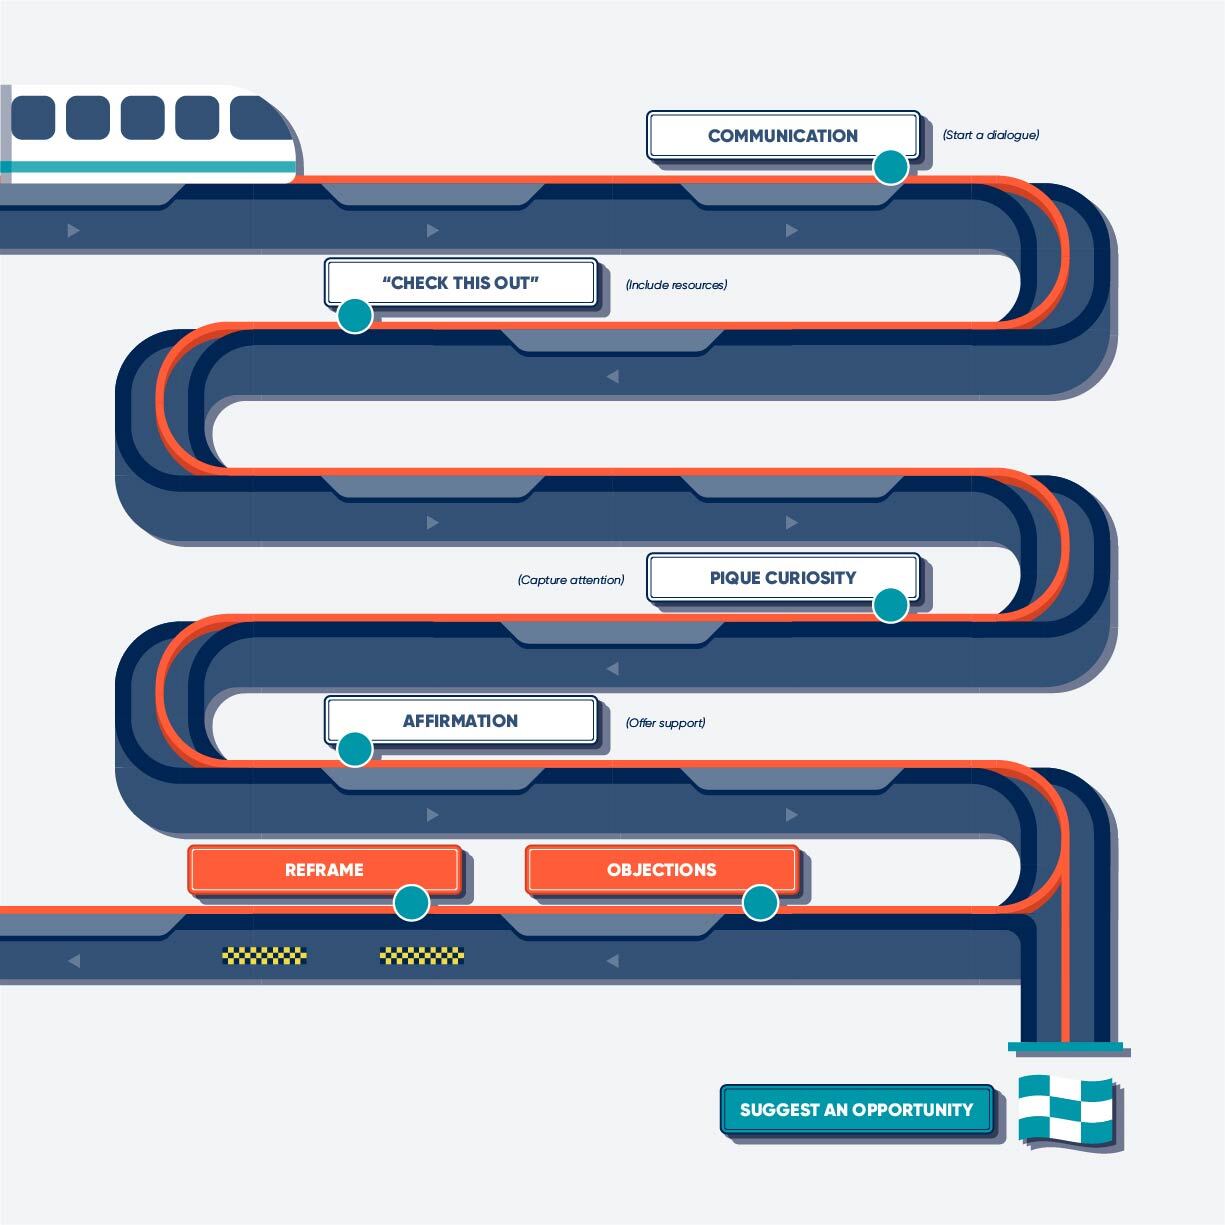 infographic showing a cartoon monorail along a curvy path with stops that say communication (start a dialogue), "check this out" (include resources), pique curiosity (capture attention), and affirmation (offer suport)  